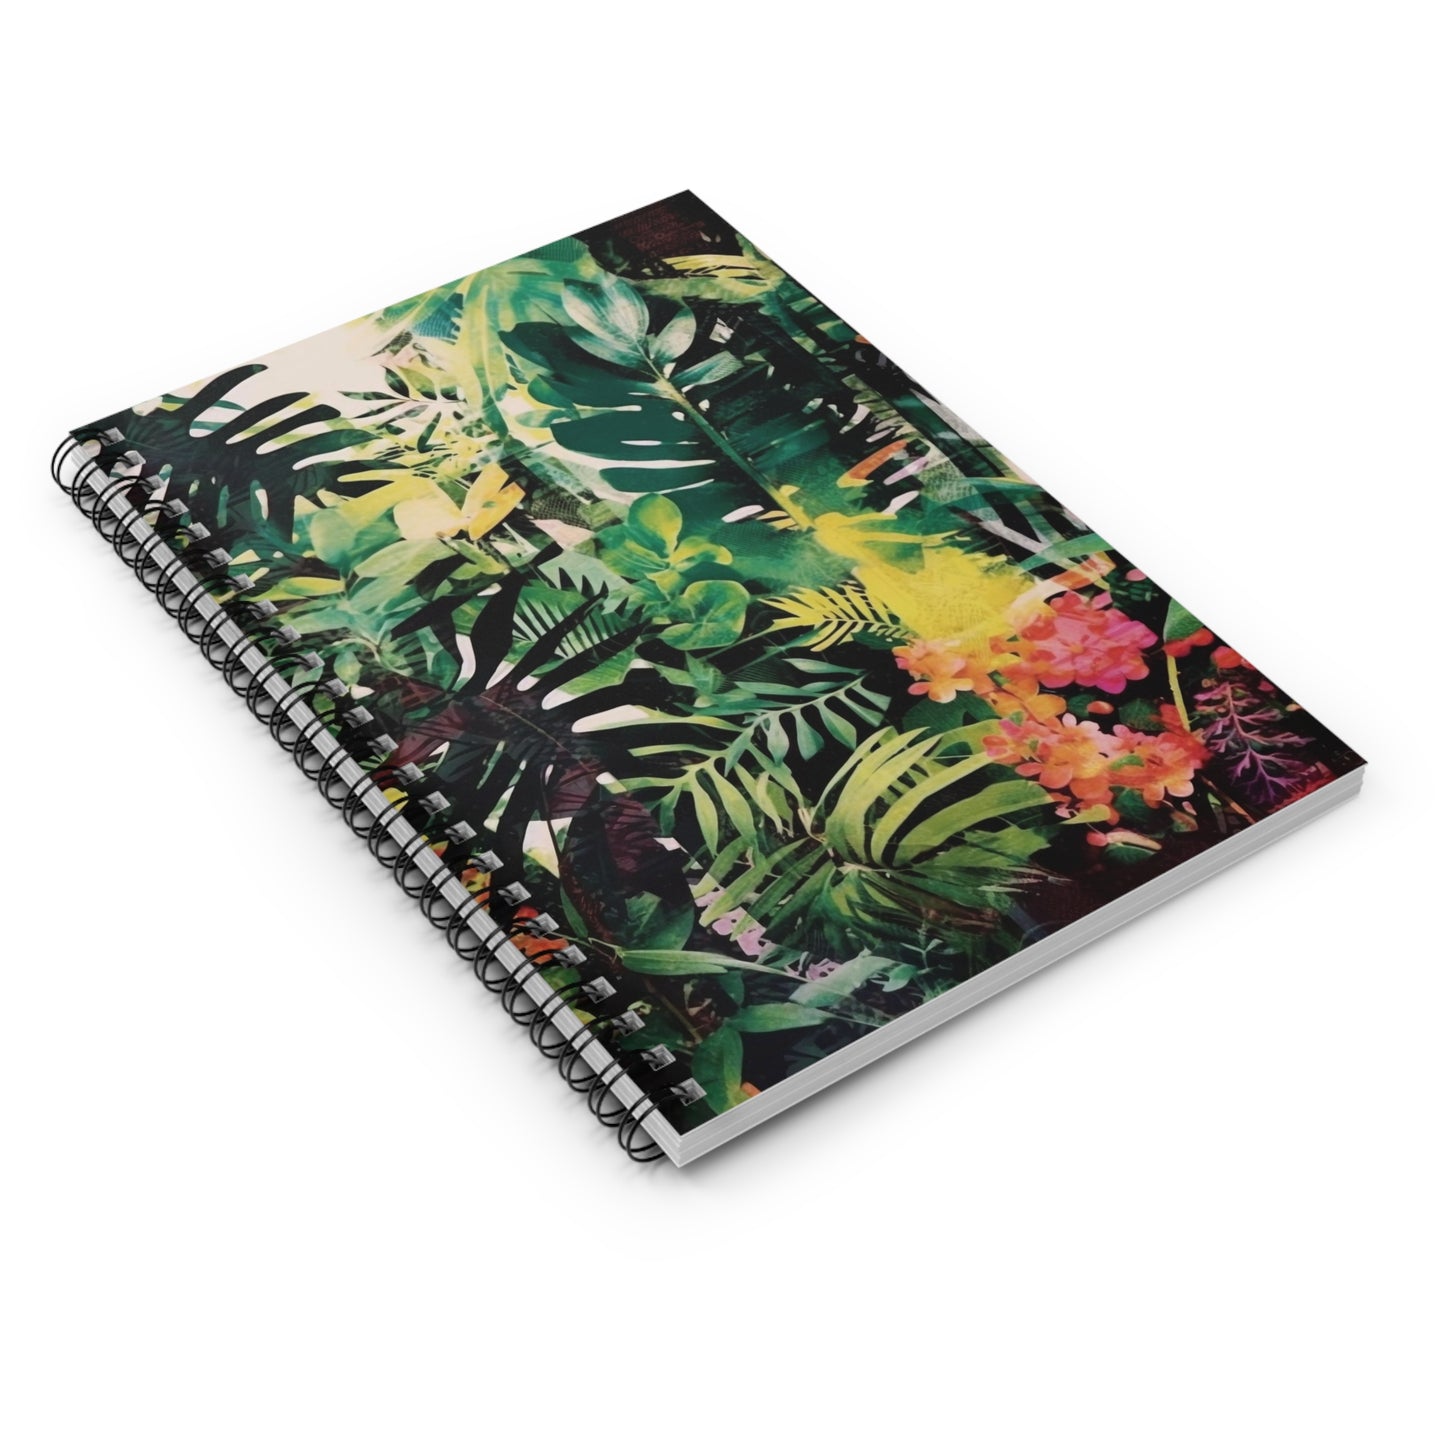 Foliage Collage Art Notebook (3) - Composition Notebook, Spiral Notebook, Journal for Writing and Note-Taking